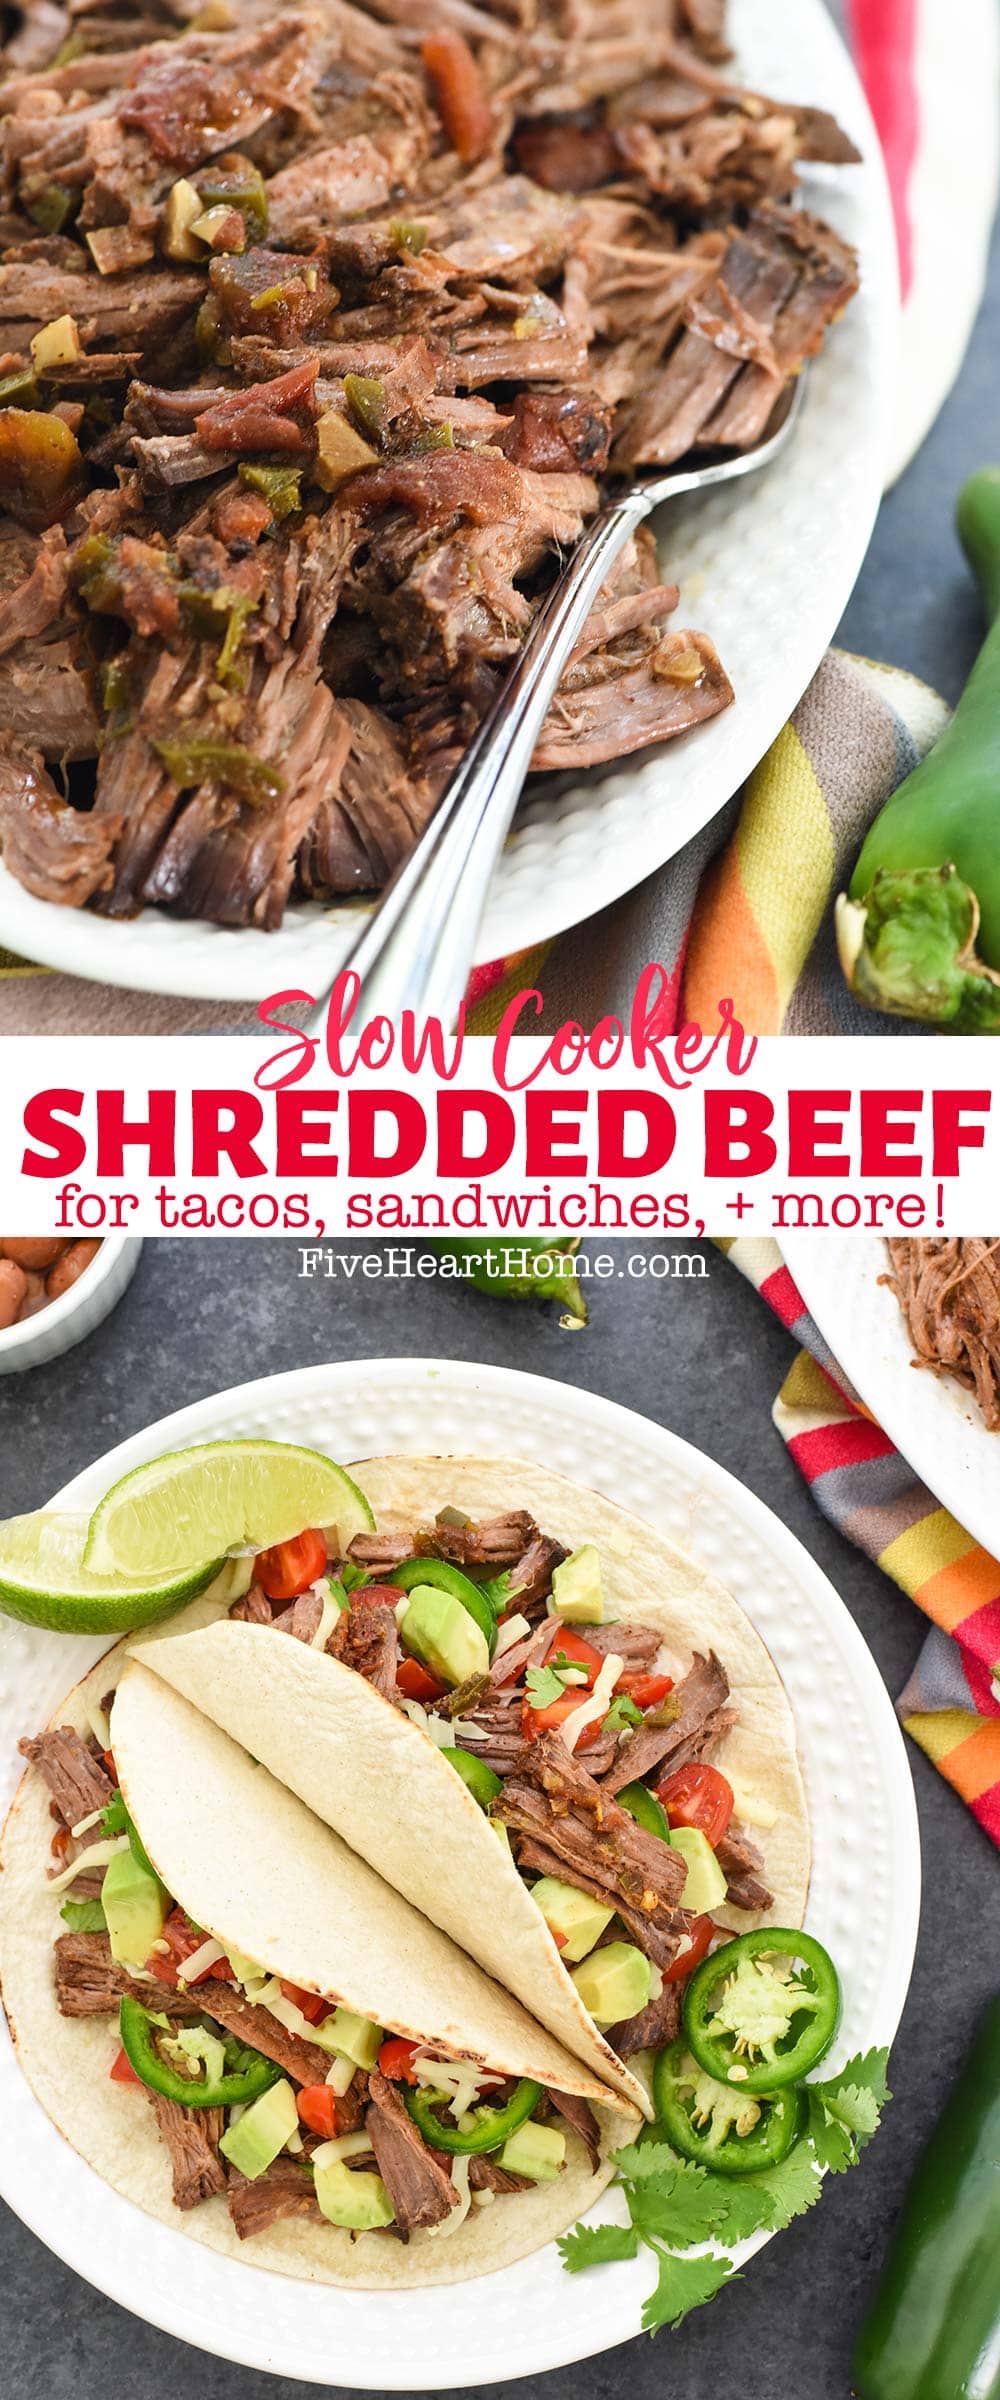 Crock Pot Shredded Beef Tacos ~ mouthwatering, infused with flavor, and effortless to make in the slow cooker. The Mexican shredded beef is not only delicious in tacos, but it’s also perfect for nachos, burritos, sandwiches, and so much more! | FiveHeartHome.com via @fivehearthome